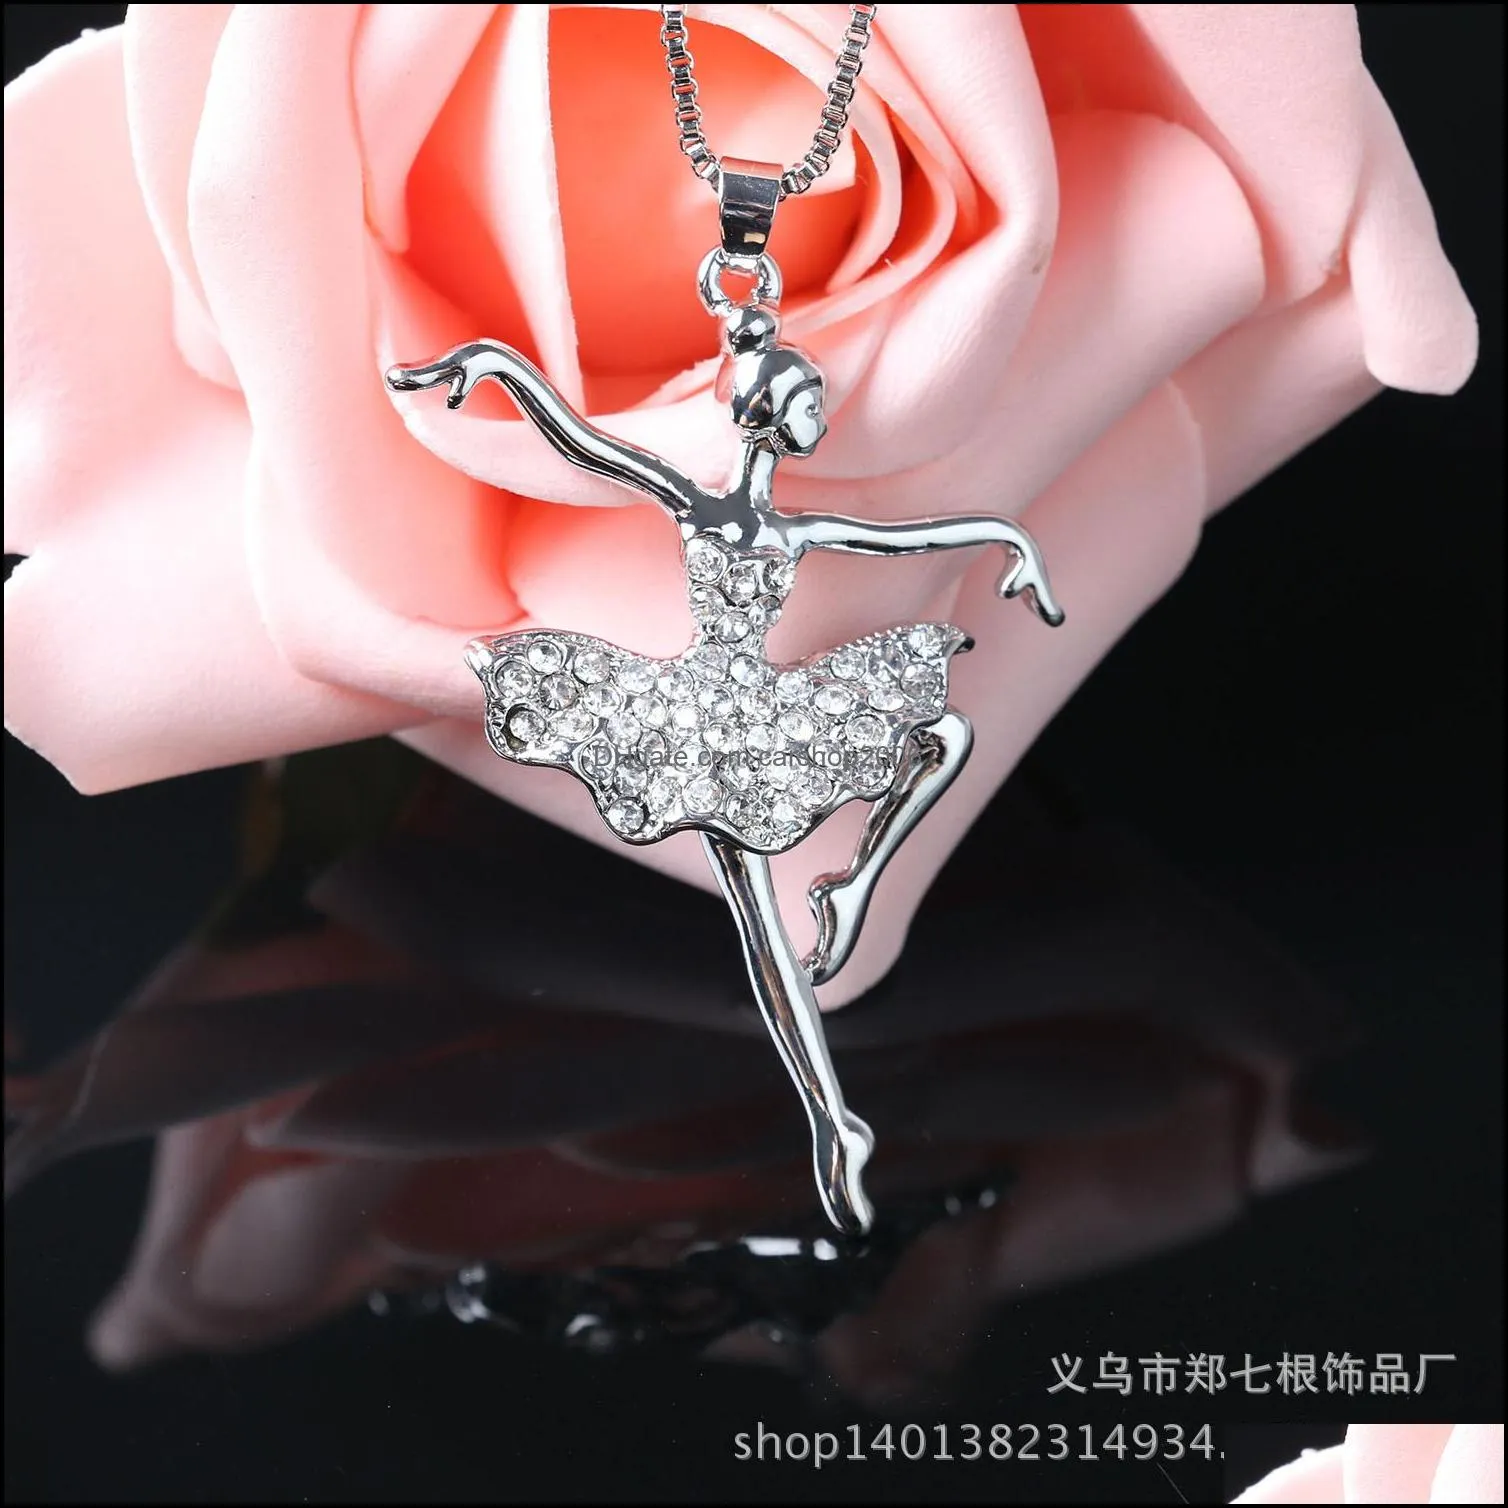 Fashion Silver Plated Necklaces Crystal Fantasy angel ballet dancer girl pendant charm necklace jewelry for women